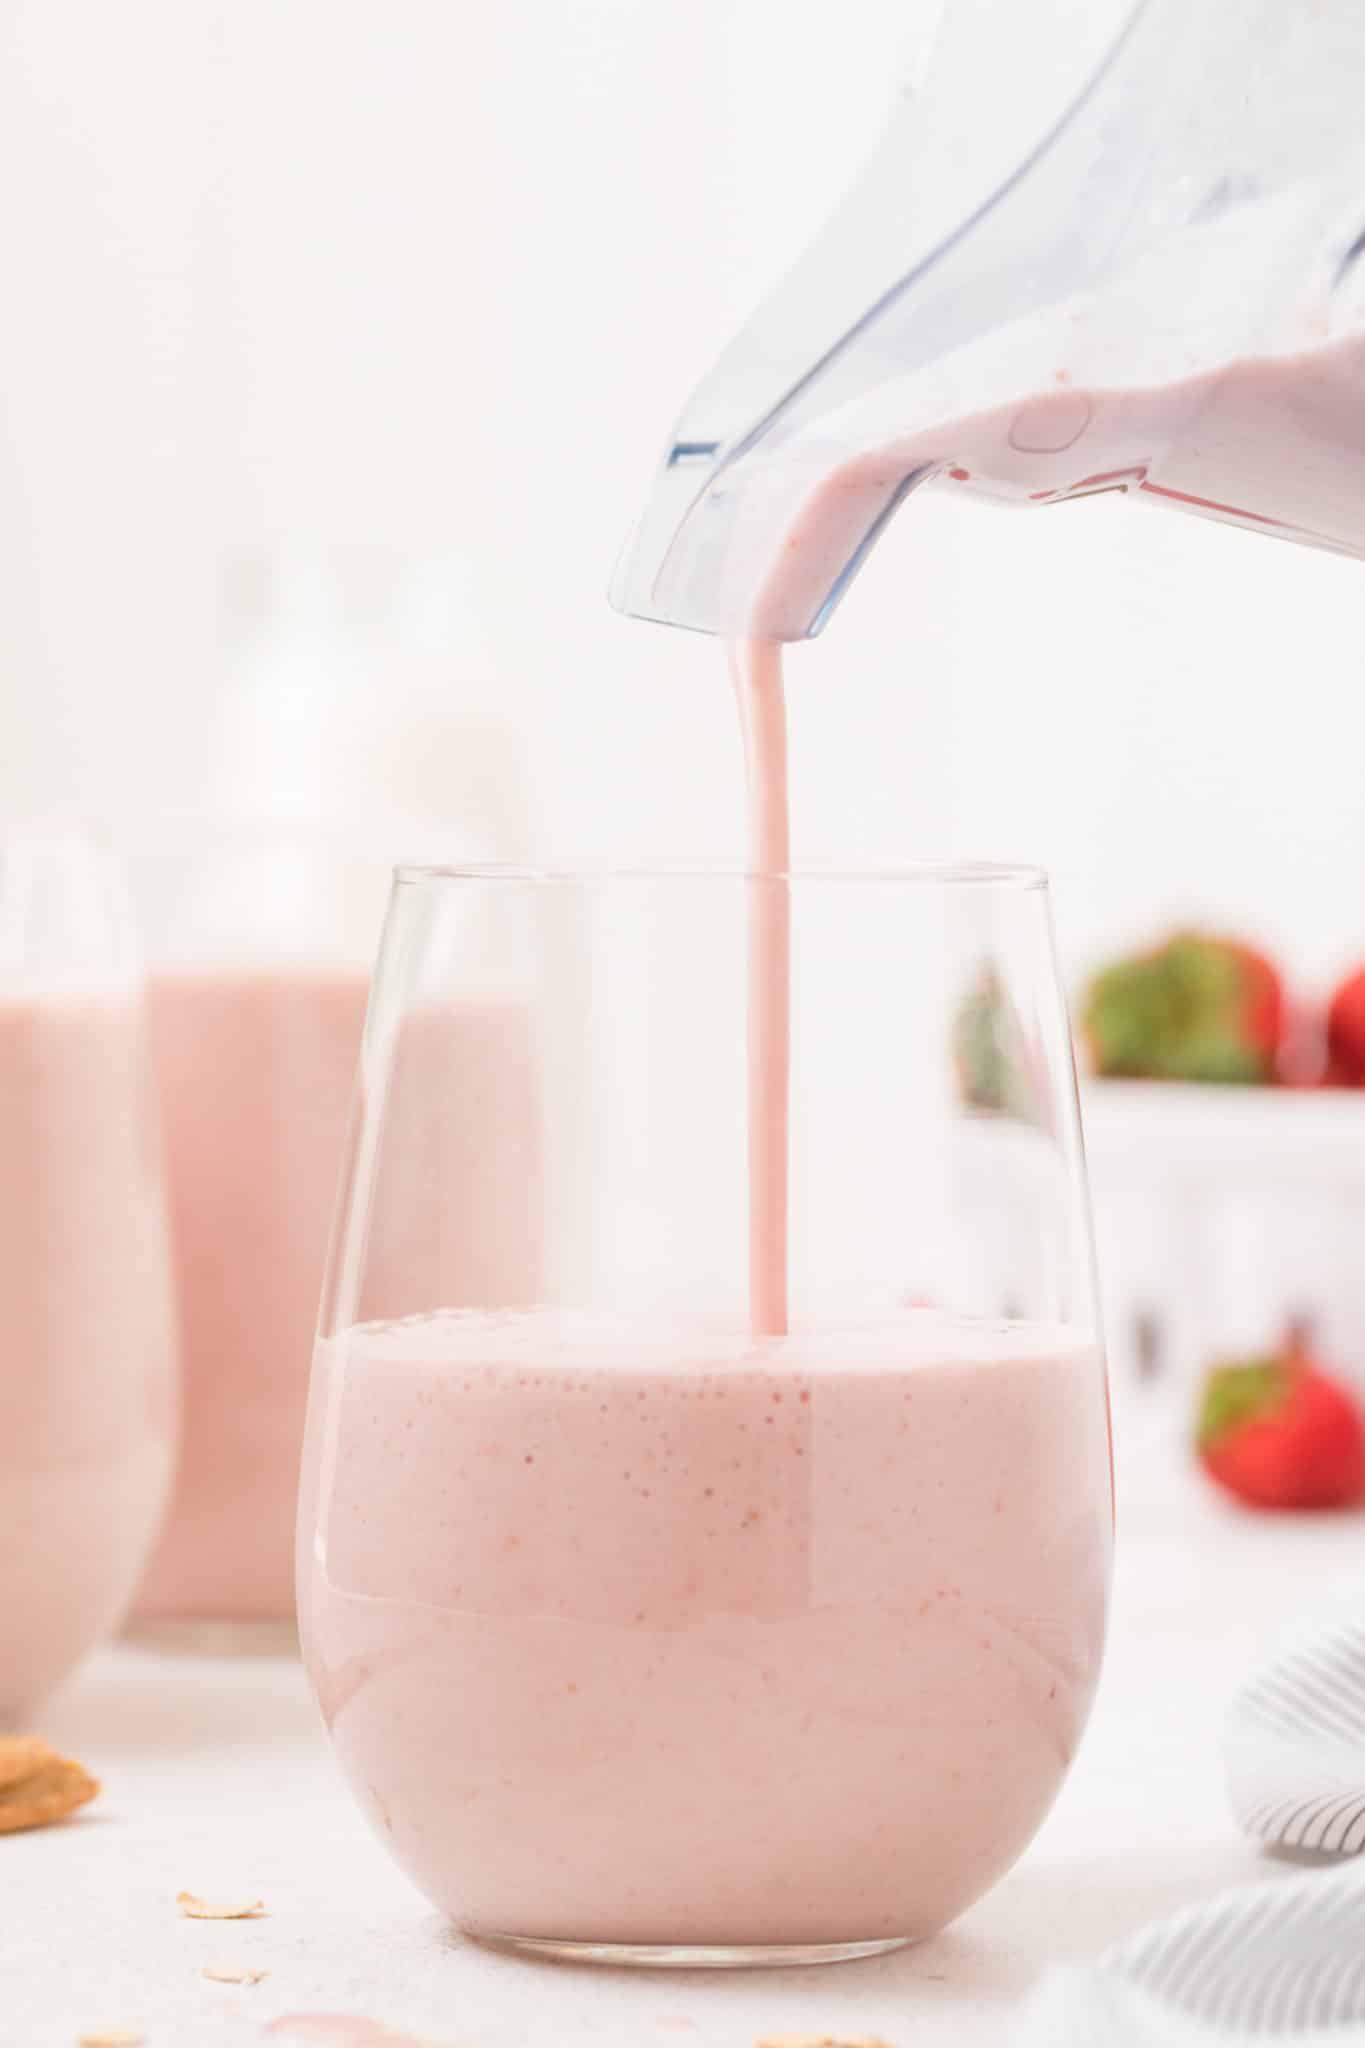 Pouring a strawberry smoothie into a glass